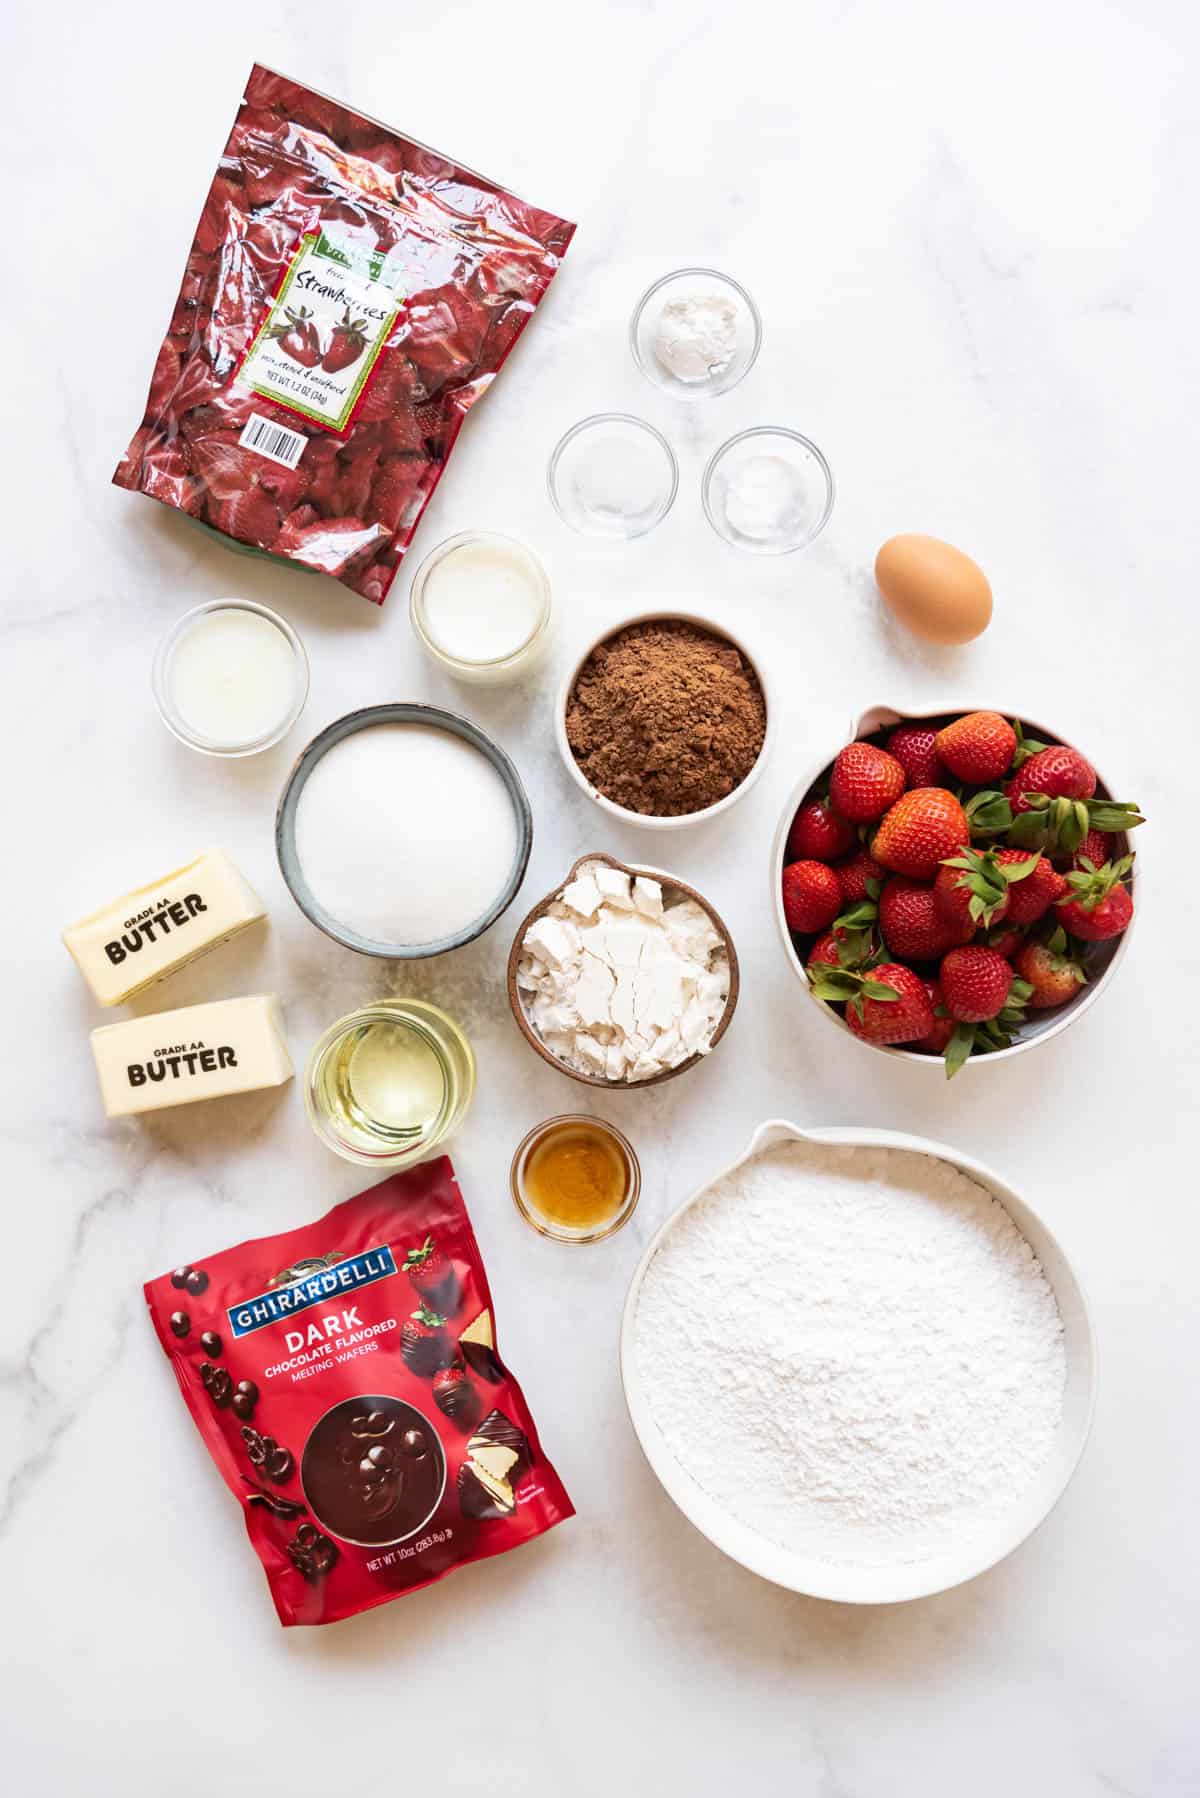 Ingredients for chocolate covered strawberry cupcakes.